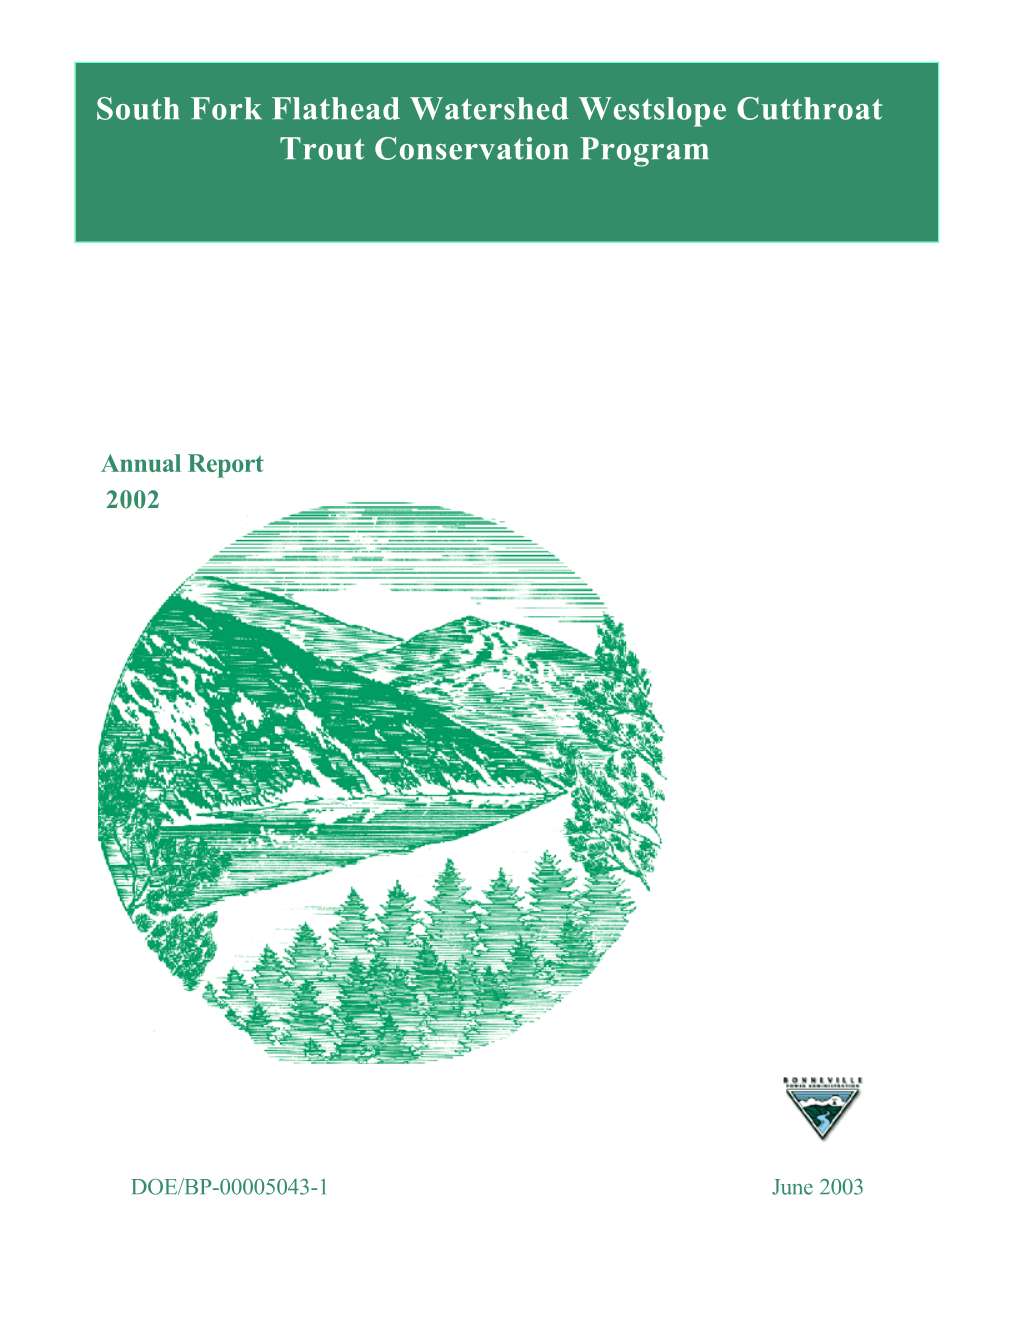 South Fork Flathead Watershed Westslope Cutthroat Trout Conservation Program